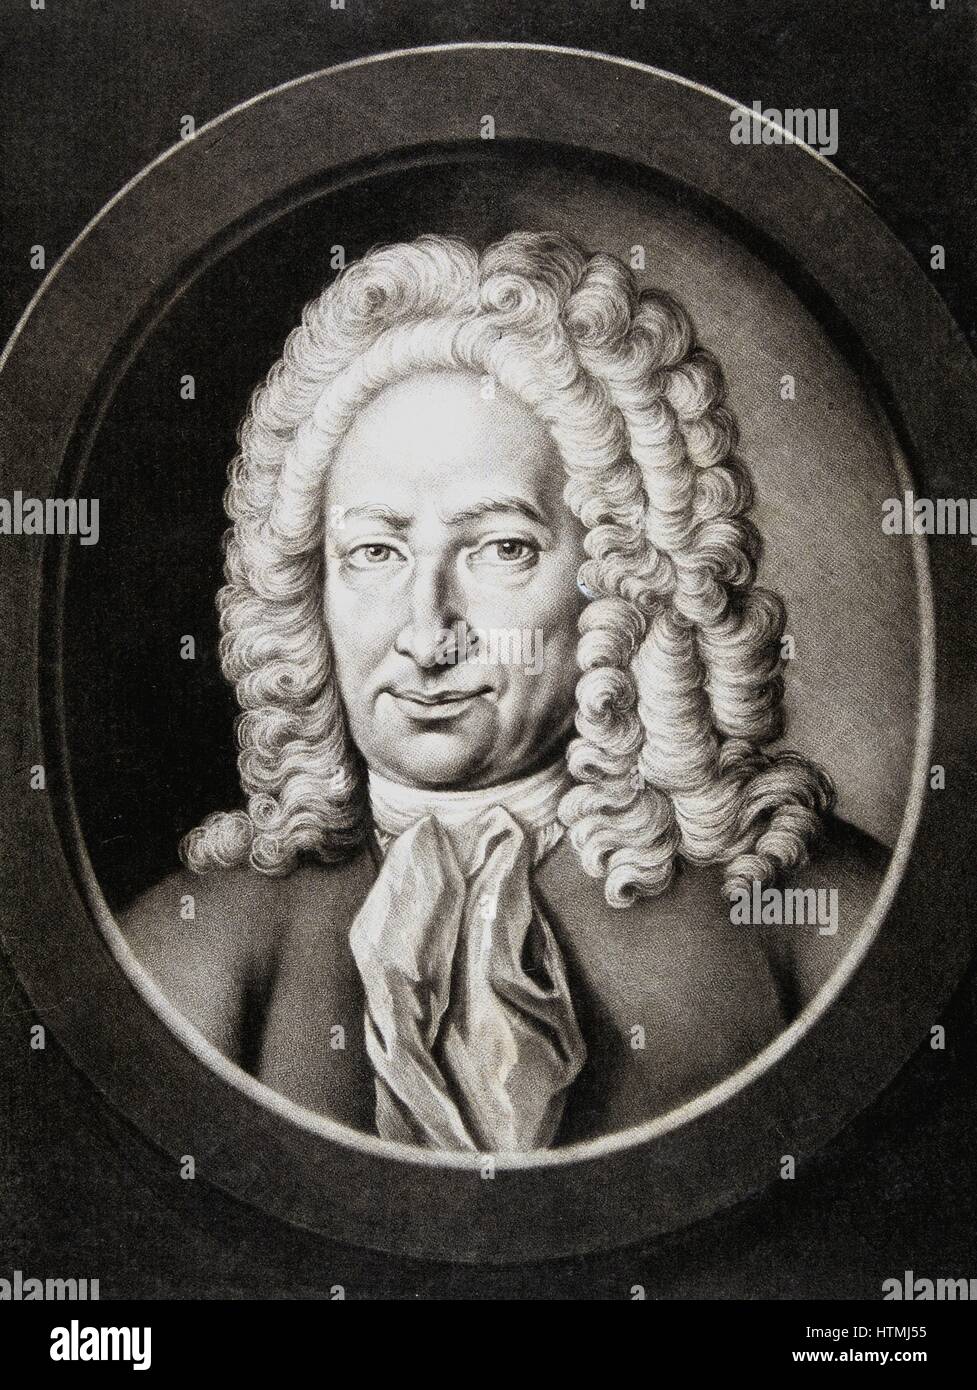 Gottfried Wilhelm von Leibniz (1646-1716). German philosopher and mathematician. Published his system of infinitesimal calculus in 1684, three years before Newton who, however, claimed priority as inventor as his publication related to earlier work. The Stock Photo